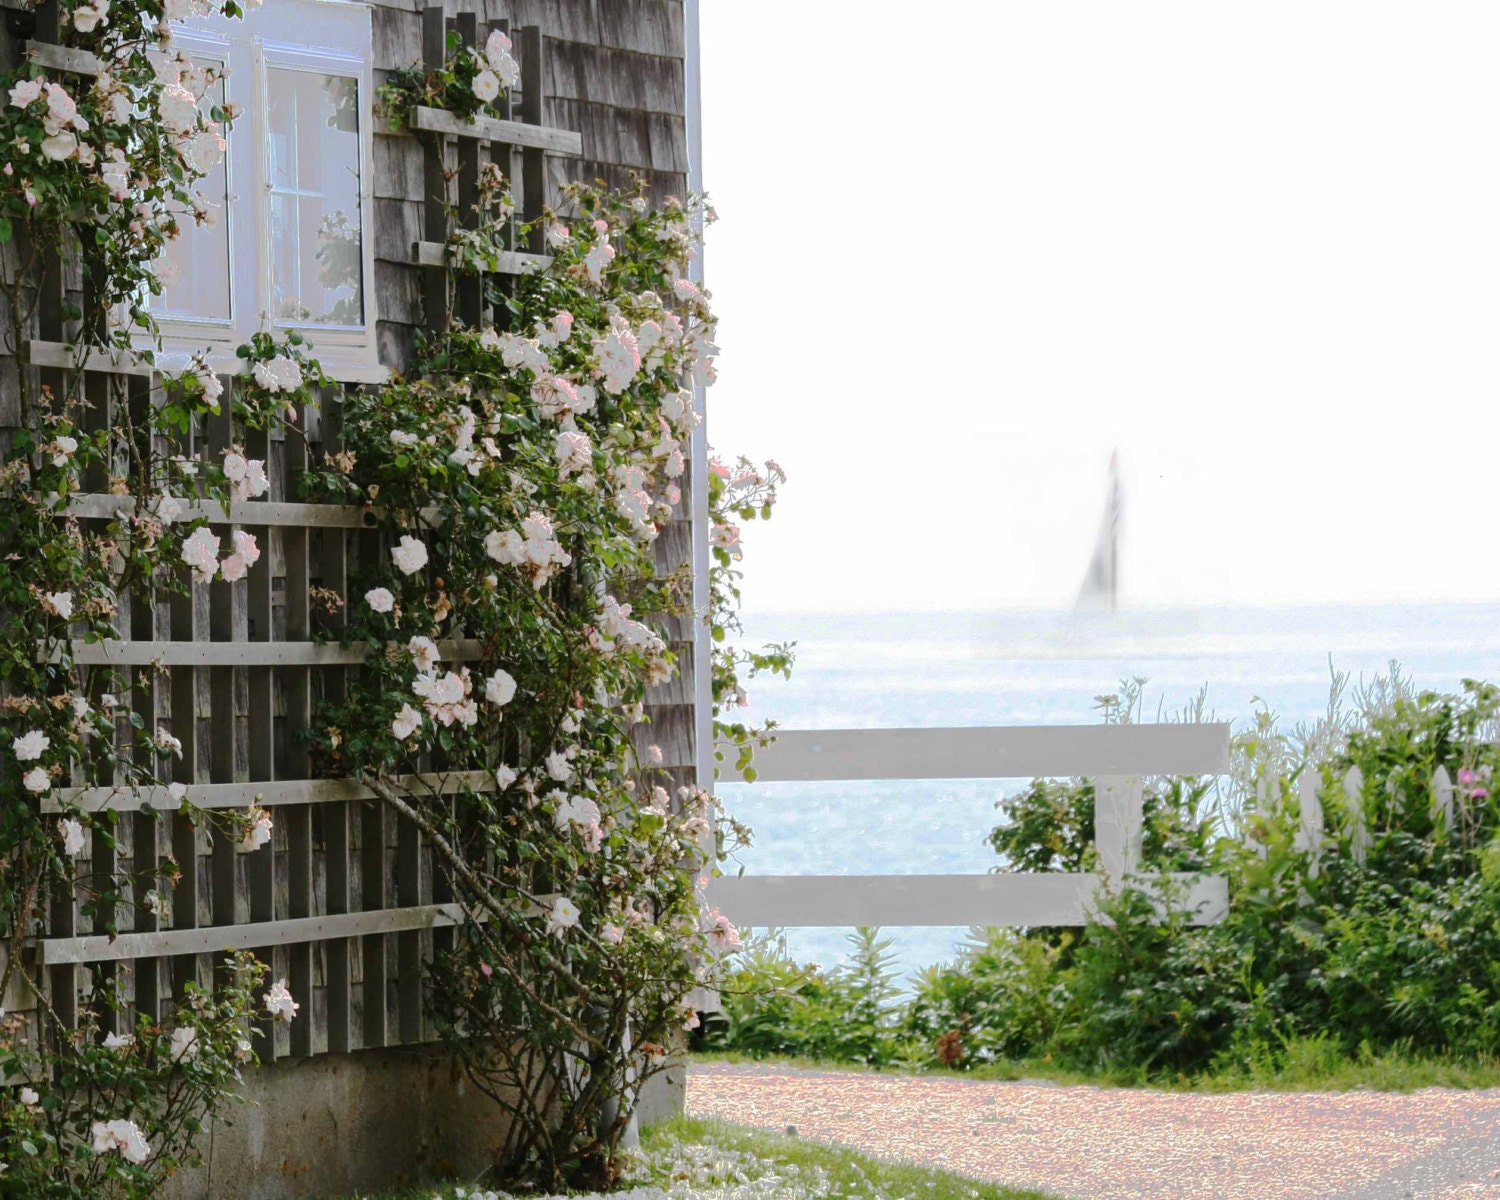 Photo Print - Sailboat, Fence, Pink Roses on Cape Cod, Shabby Chic Decor, Summer Cottage, Nantucket Cottage - CapeCodPhoto